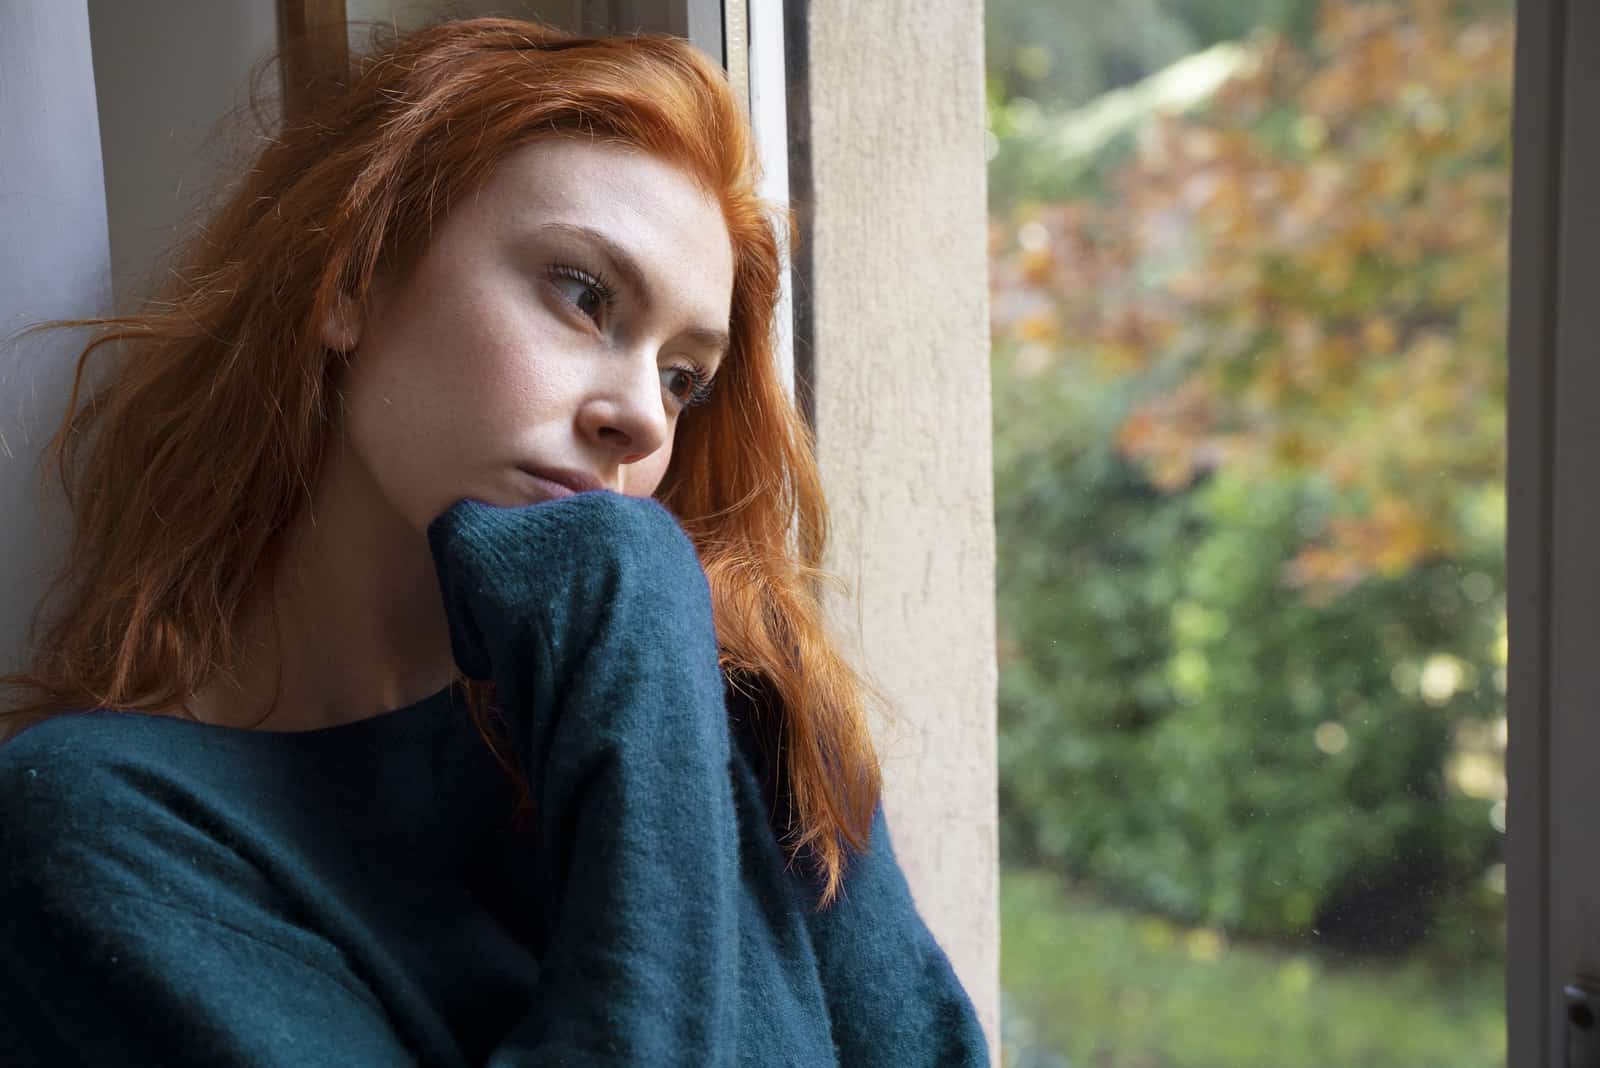 a sad woman looks out the window